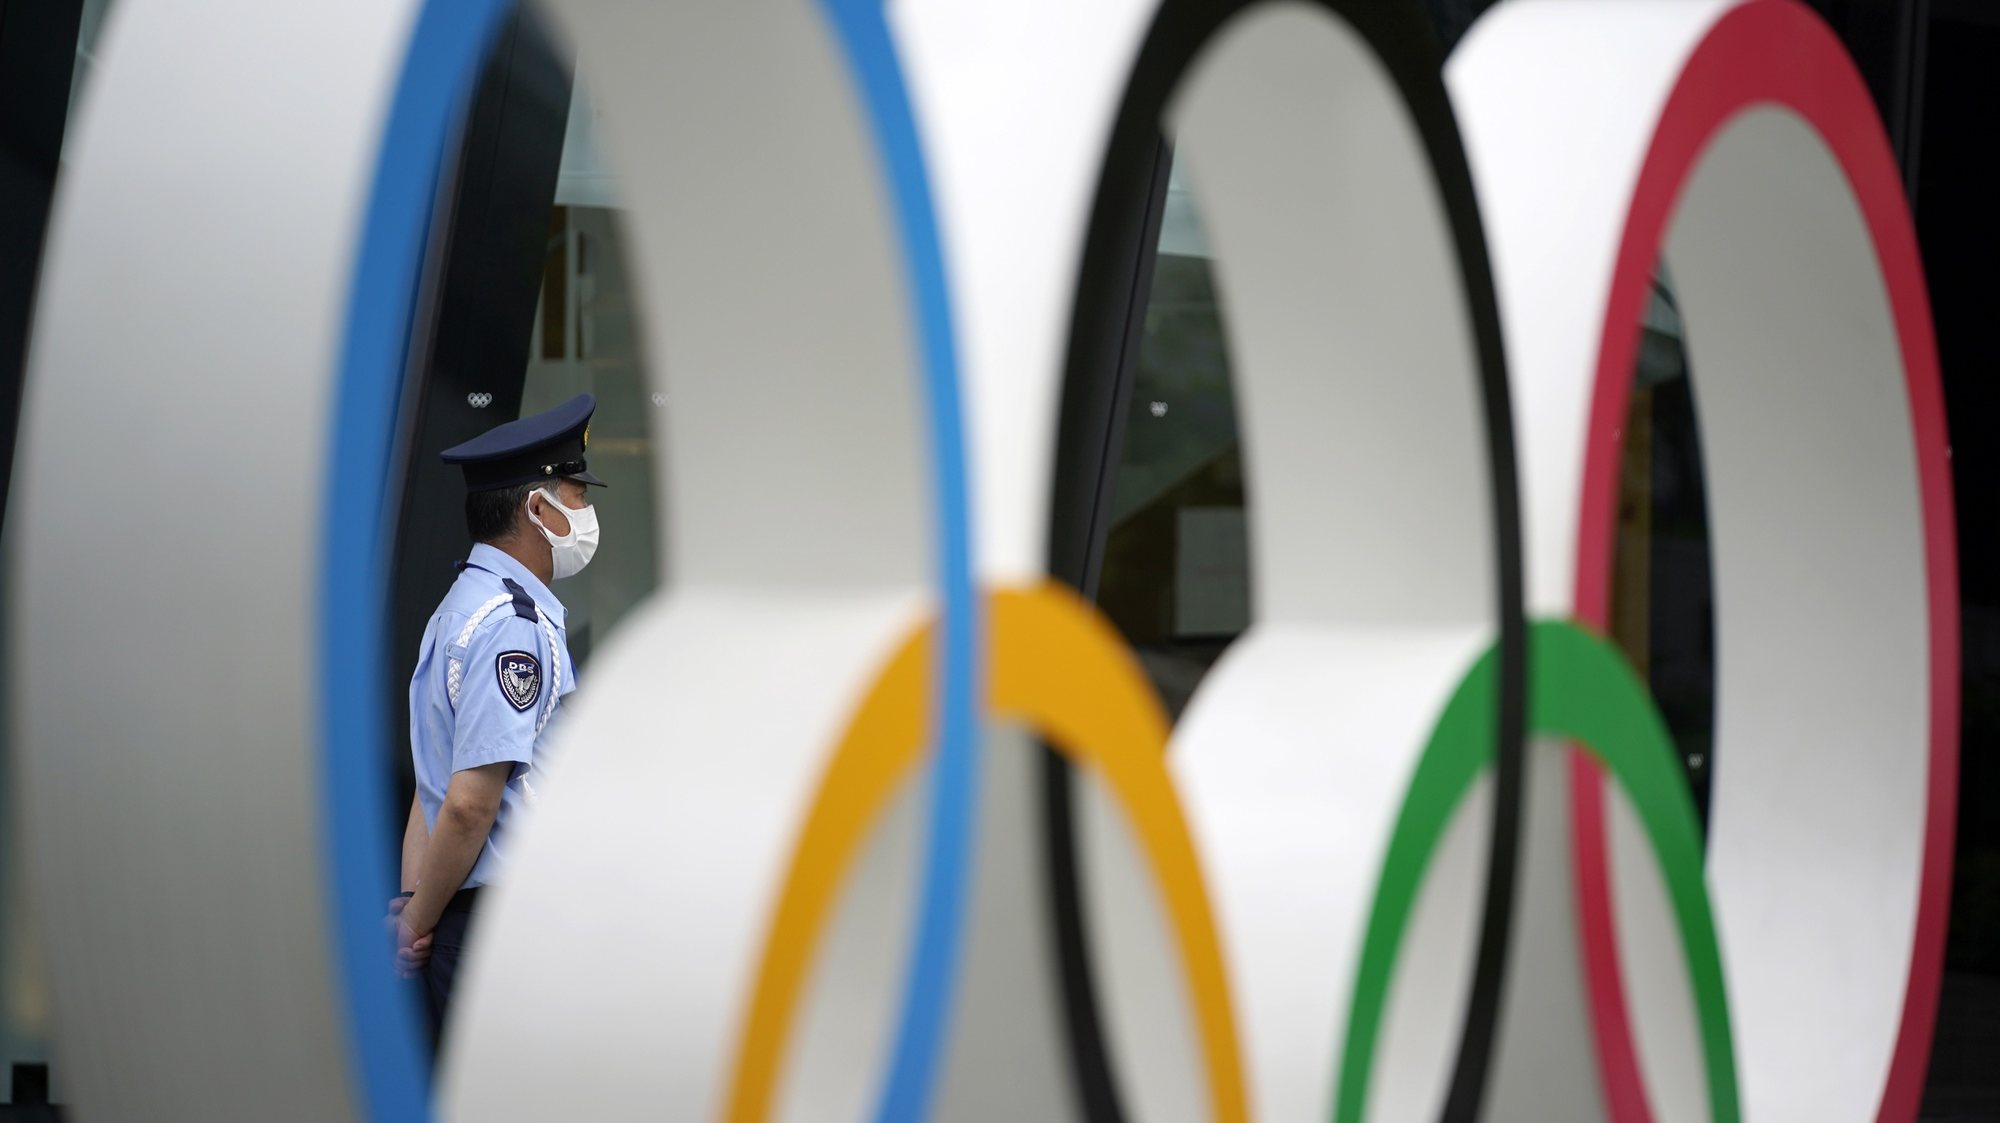 epa09293117 A security guard is seen through an Olympic Rings monument near the National Stadium, the main stadium of the 2020 Tokyo Olympic Games, in Tokyo, Japan, 22 June 2021. Tokyo will mark one month before the opening of the Tokyo 2020 Olympic Games on 23 June 2021. The Summer Games were postponed due to COVID-19 Coronavirus pandemic.  EPA/FRANCK ROBICHON